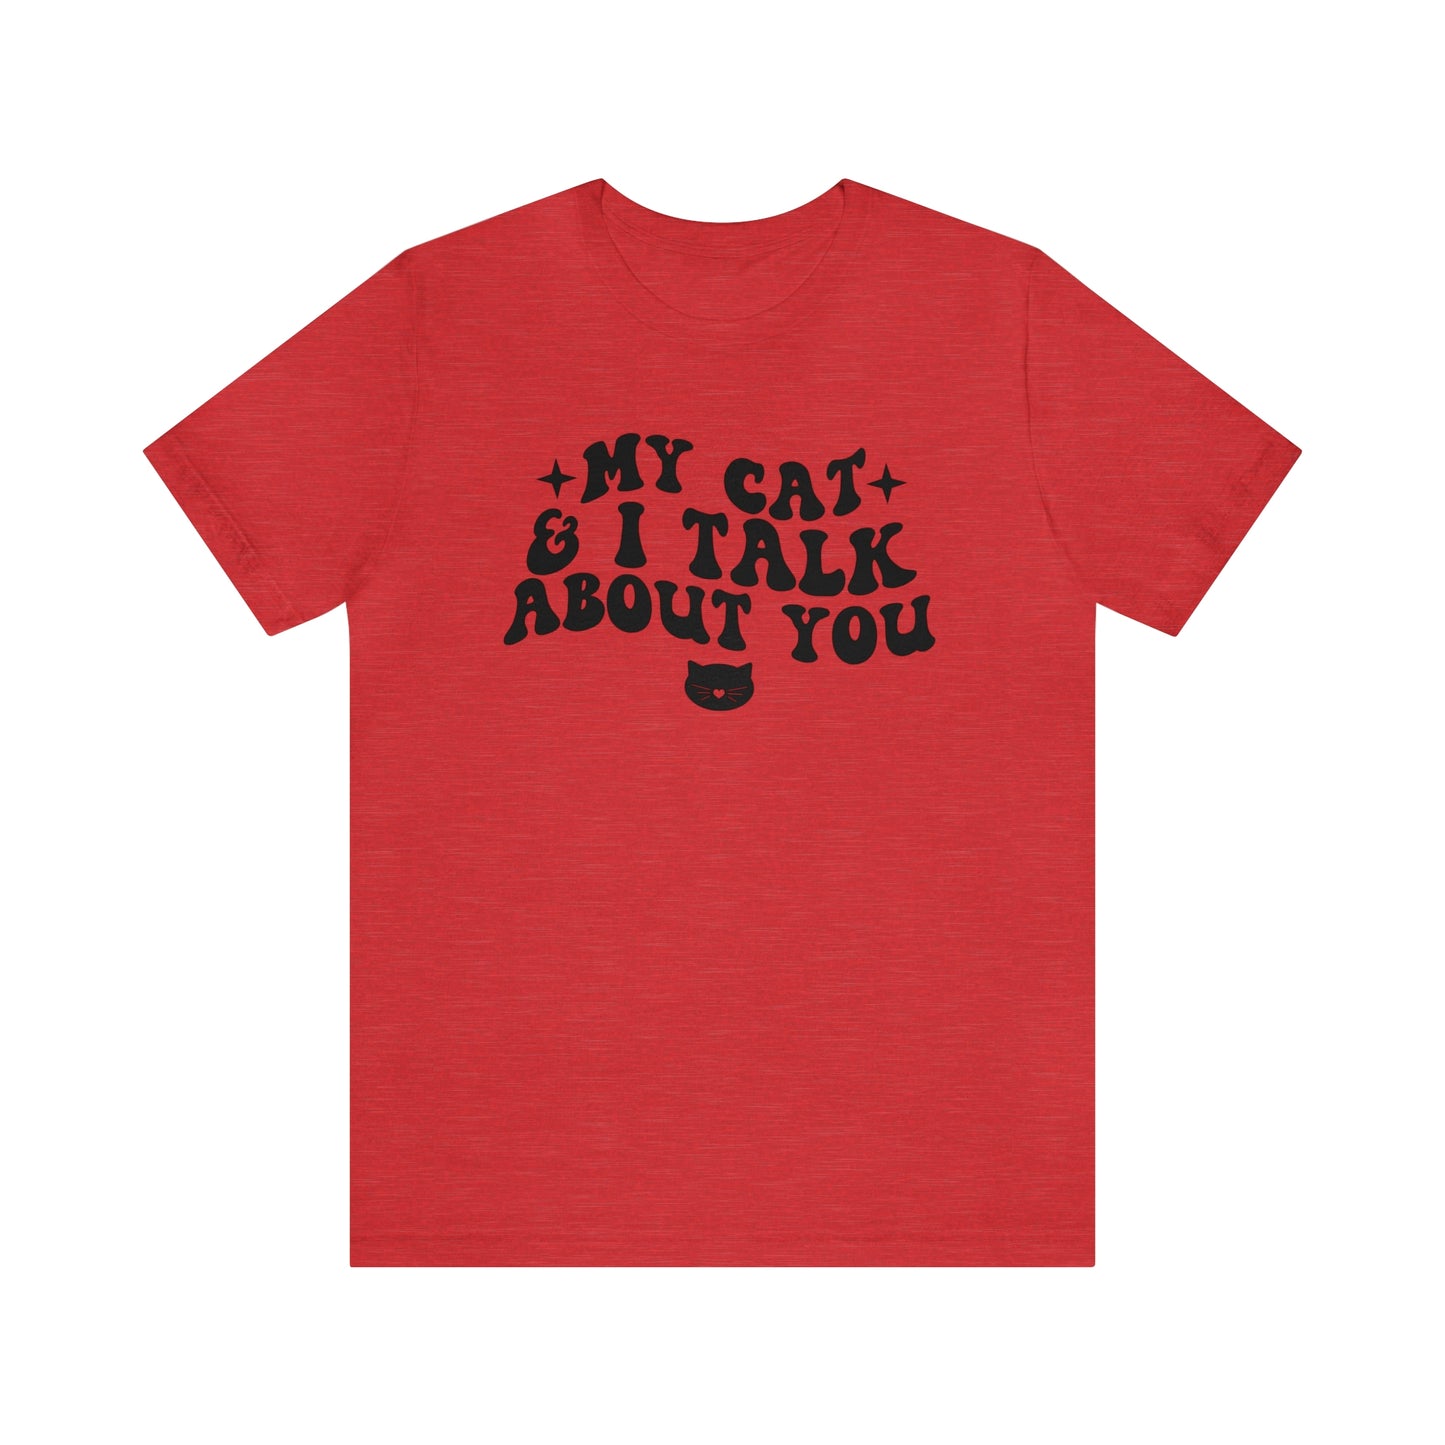 My Cat and I Talk About You Short Sleeve T-shirt